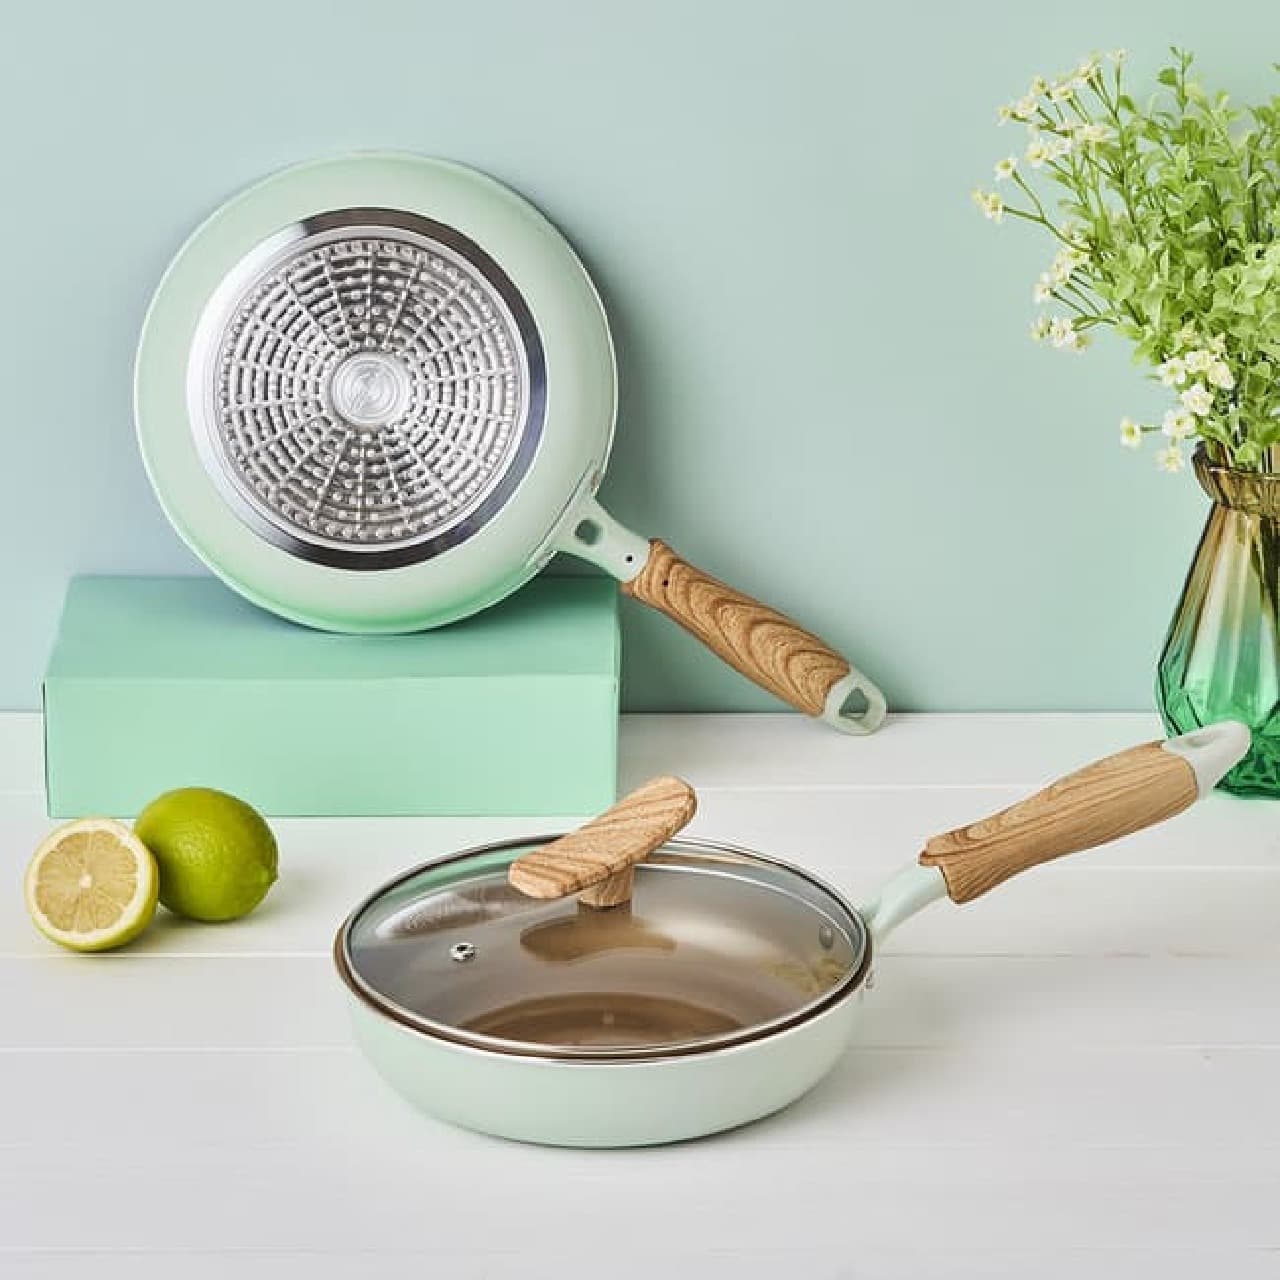 Evercook Frying Pan Set for New Life -- 20cm Frying Pan and Glass Lid Set in Pastel Spring Colors!